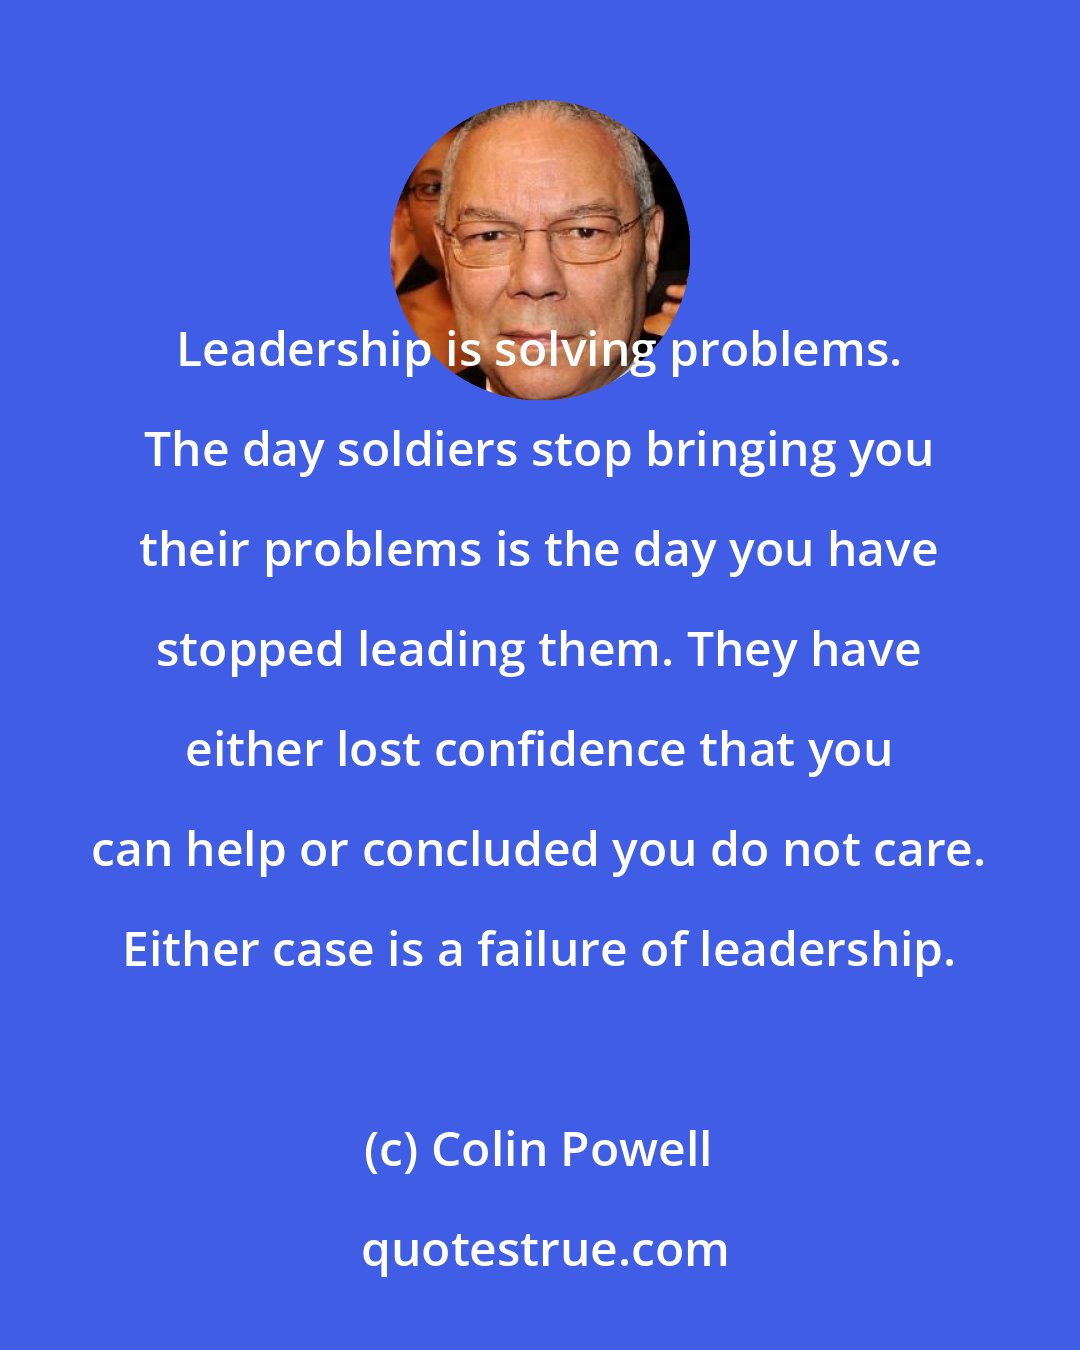 Colin Powell: Leadership is solving problems. The day soldiers stop bringing you their problems is the day you have stopped leading them. They have either lost confidence that you can help or concluded you do not care. Either case is a failure of leadership.